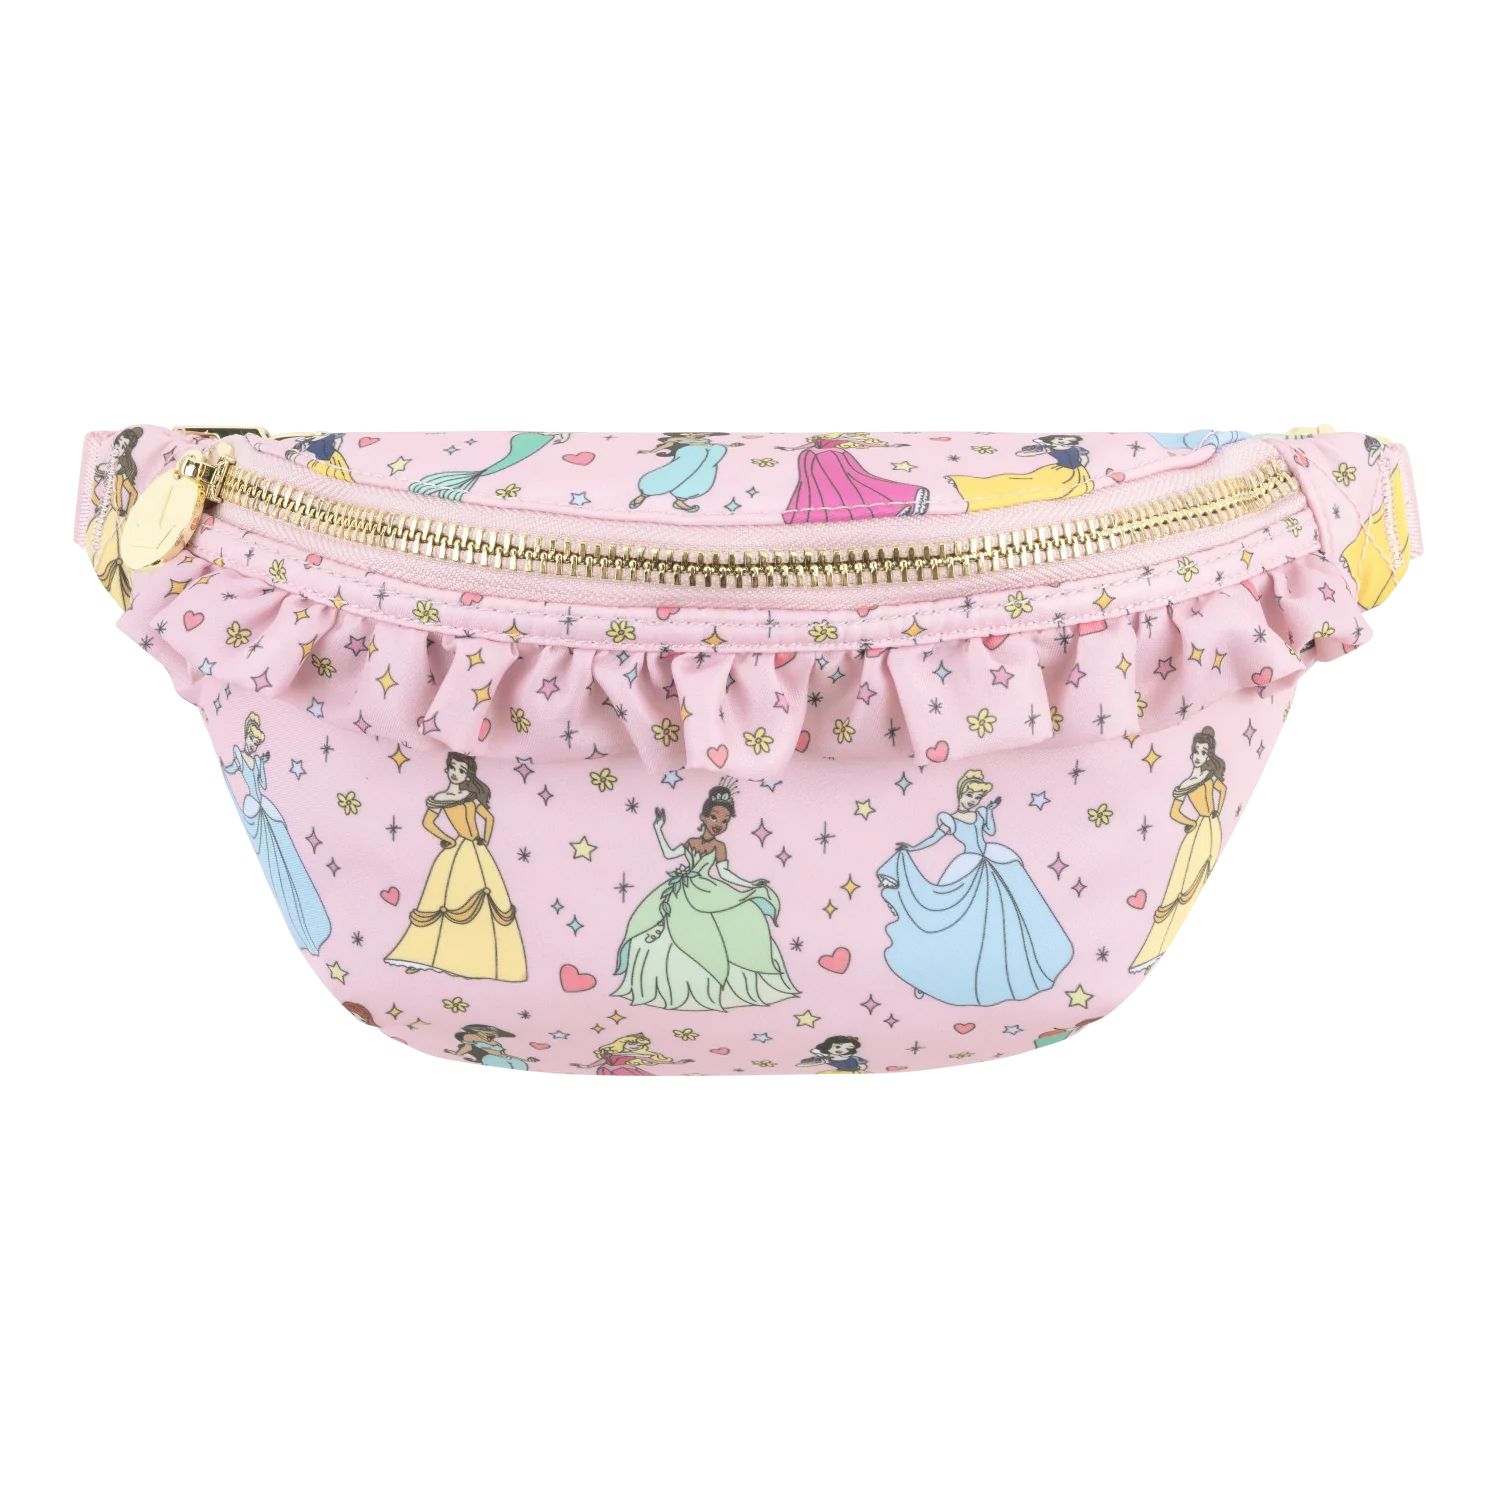 Never Stop Dreaming Fanny Pack | SCLN Customizable Fanny Pack - Stoney Clover Lane | Stoney Clover Lane